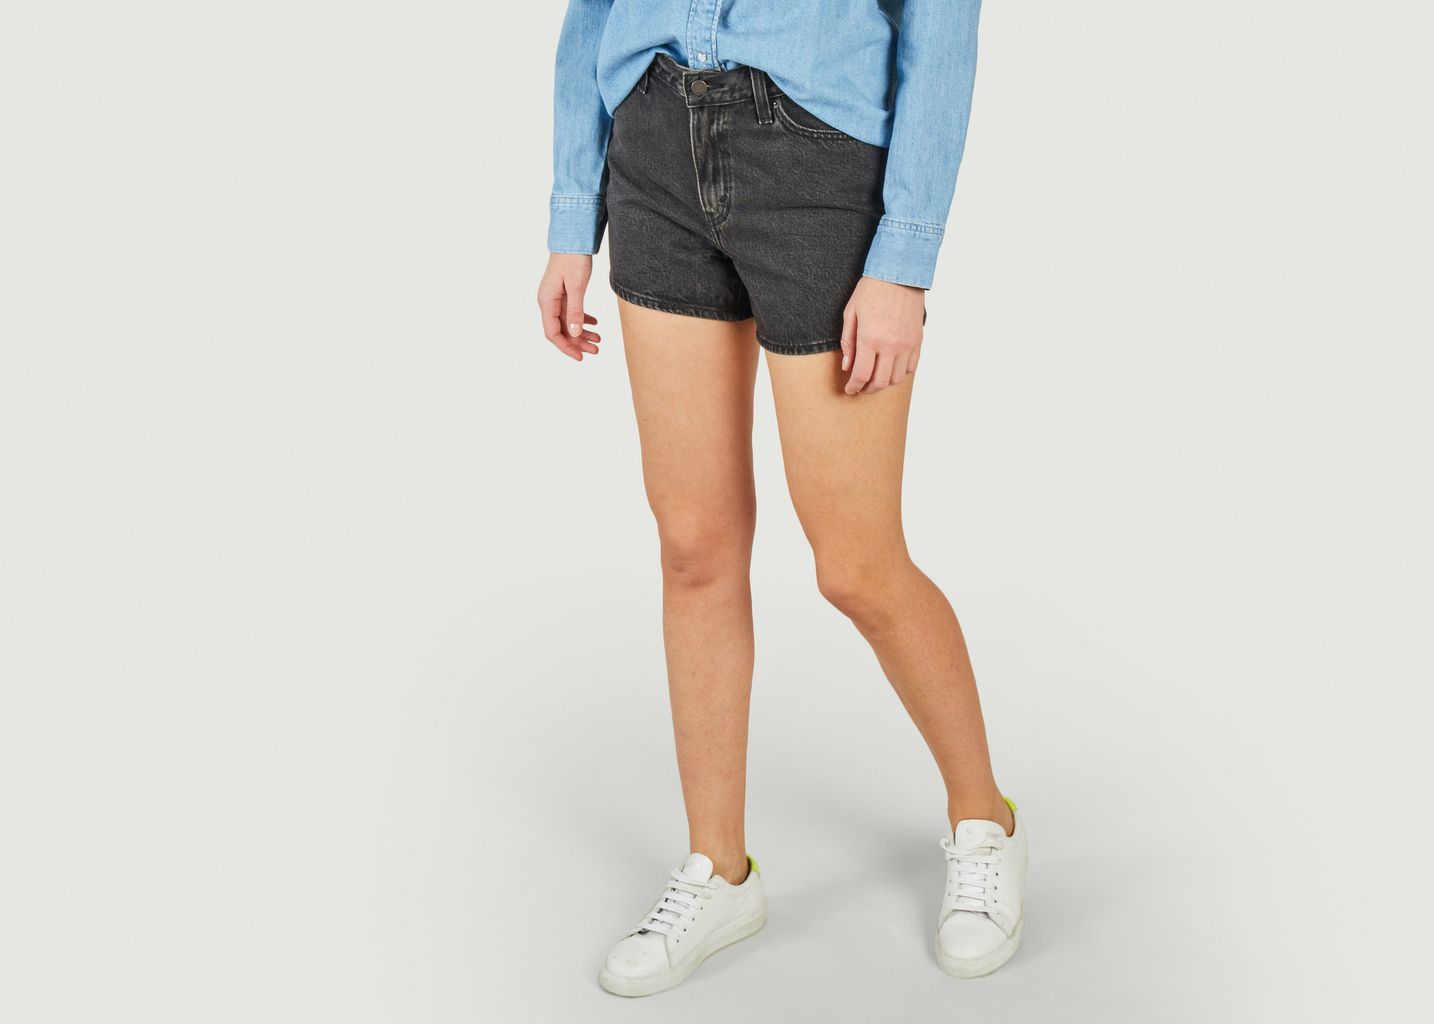 Mom 80's shorts - Levi's Red Tab